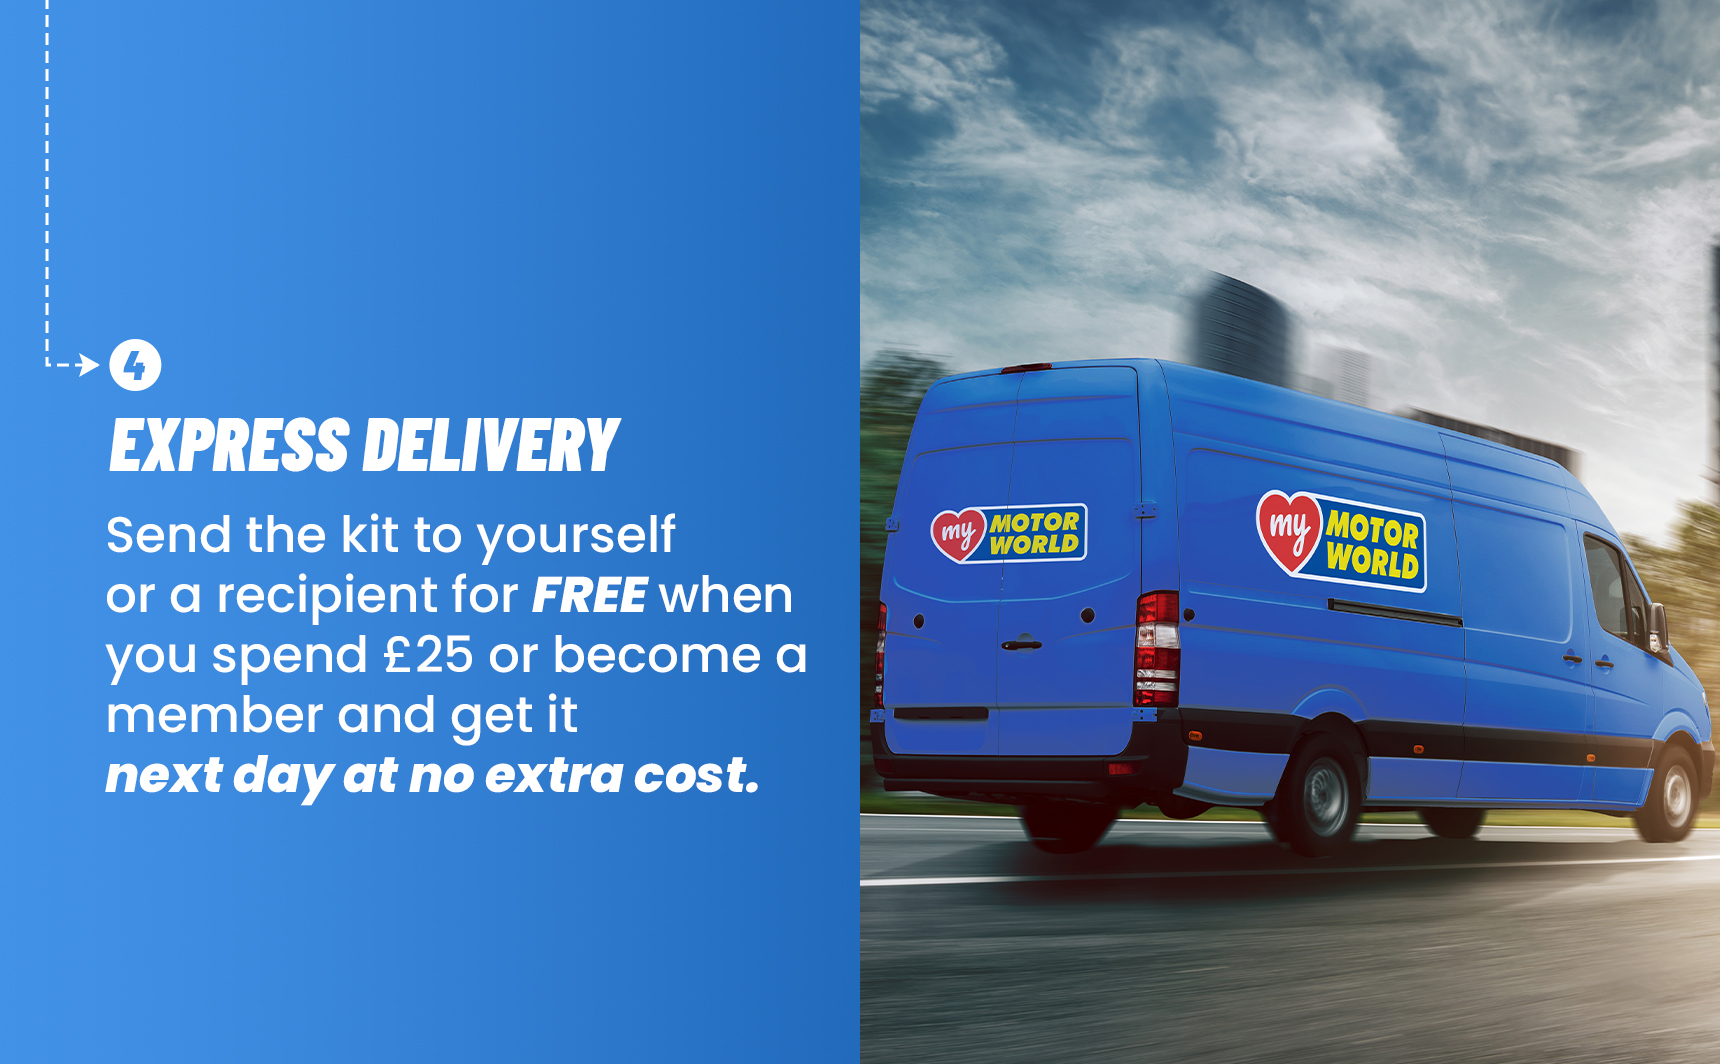 Step 4 - Express Delivery. Image of a blue branded my motorworld delivery van.